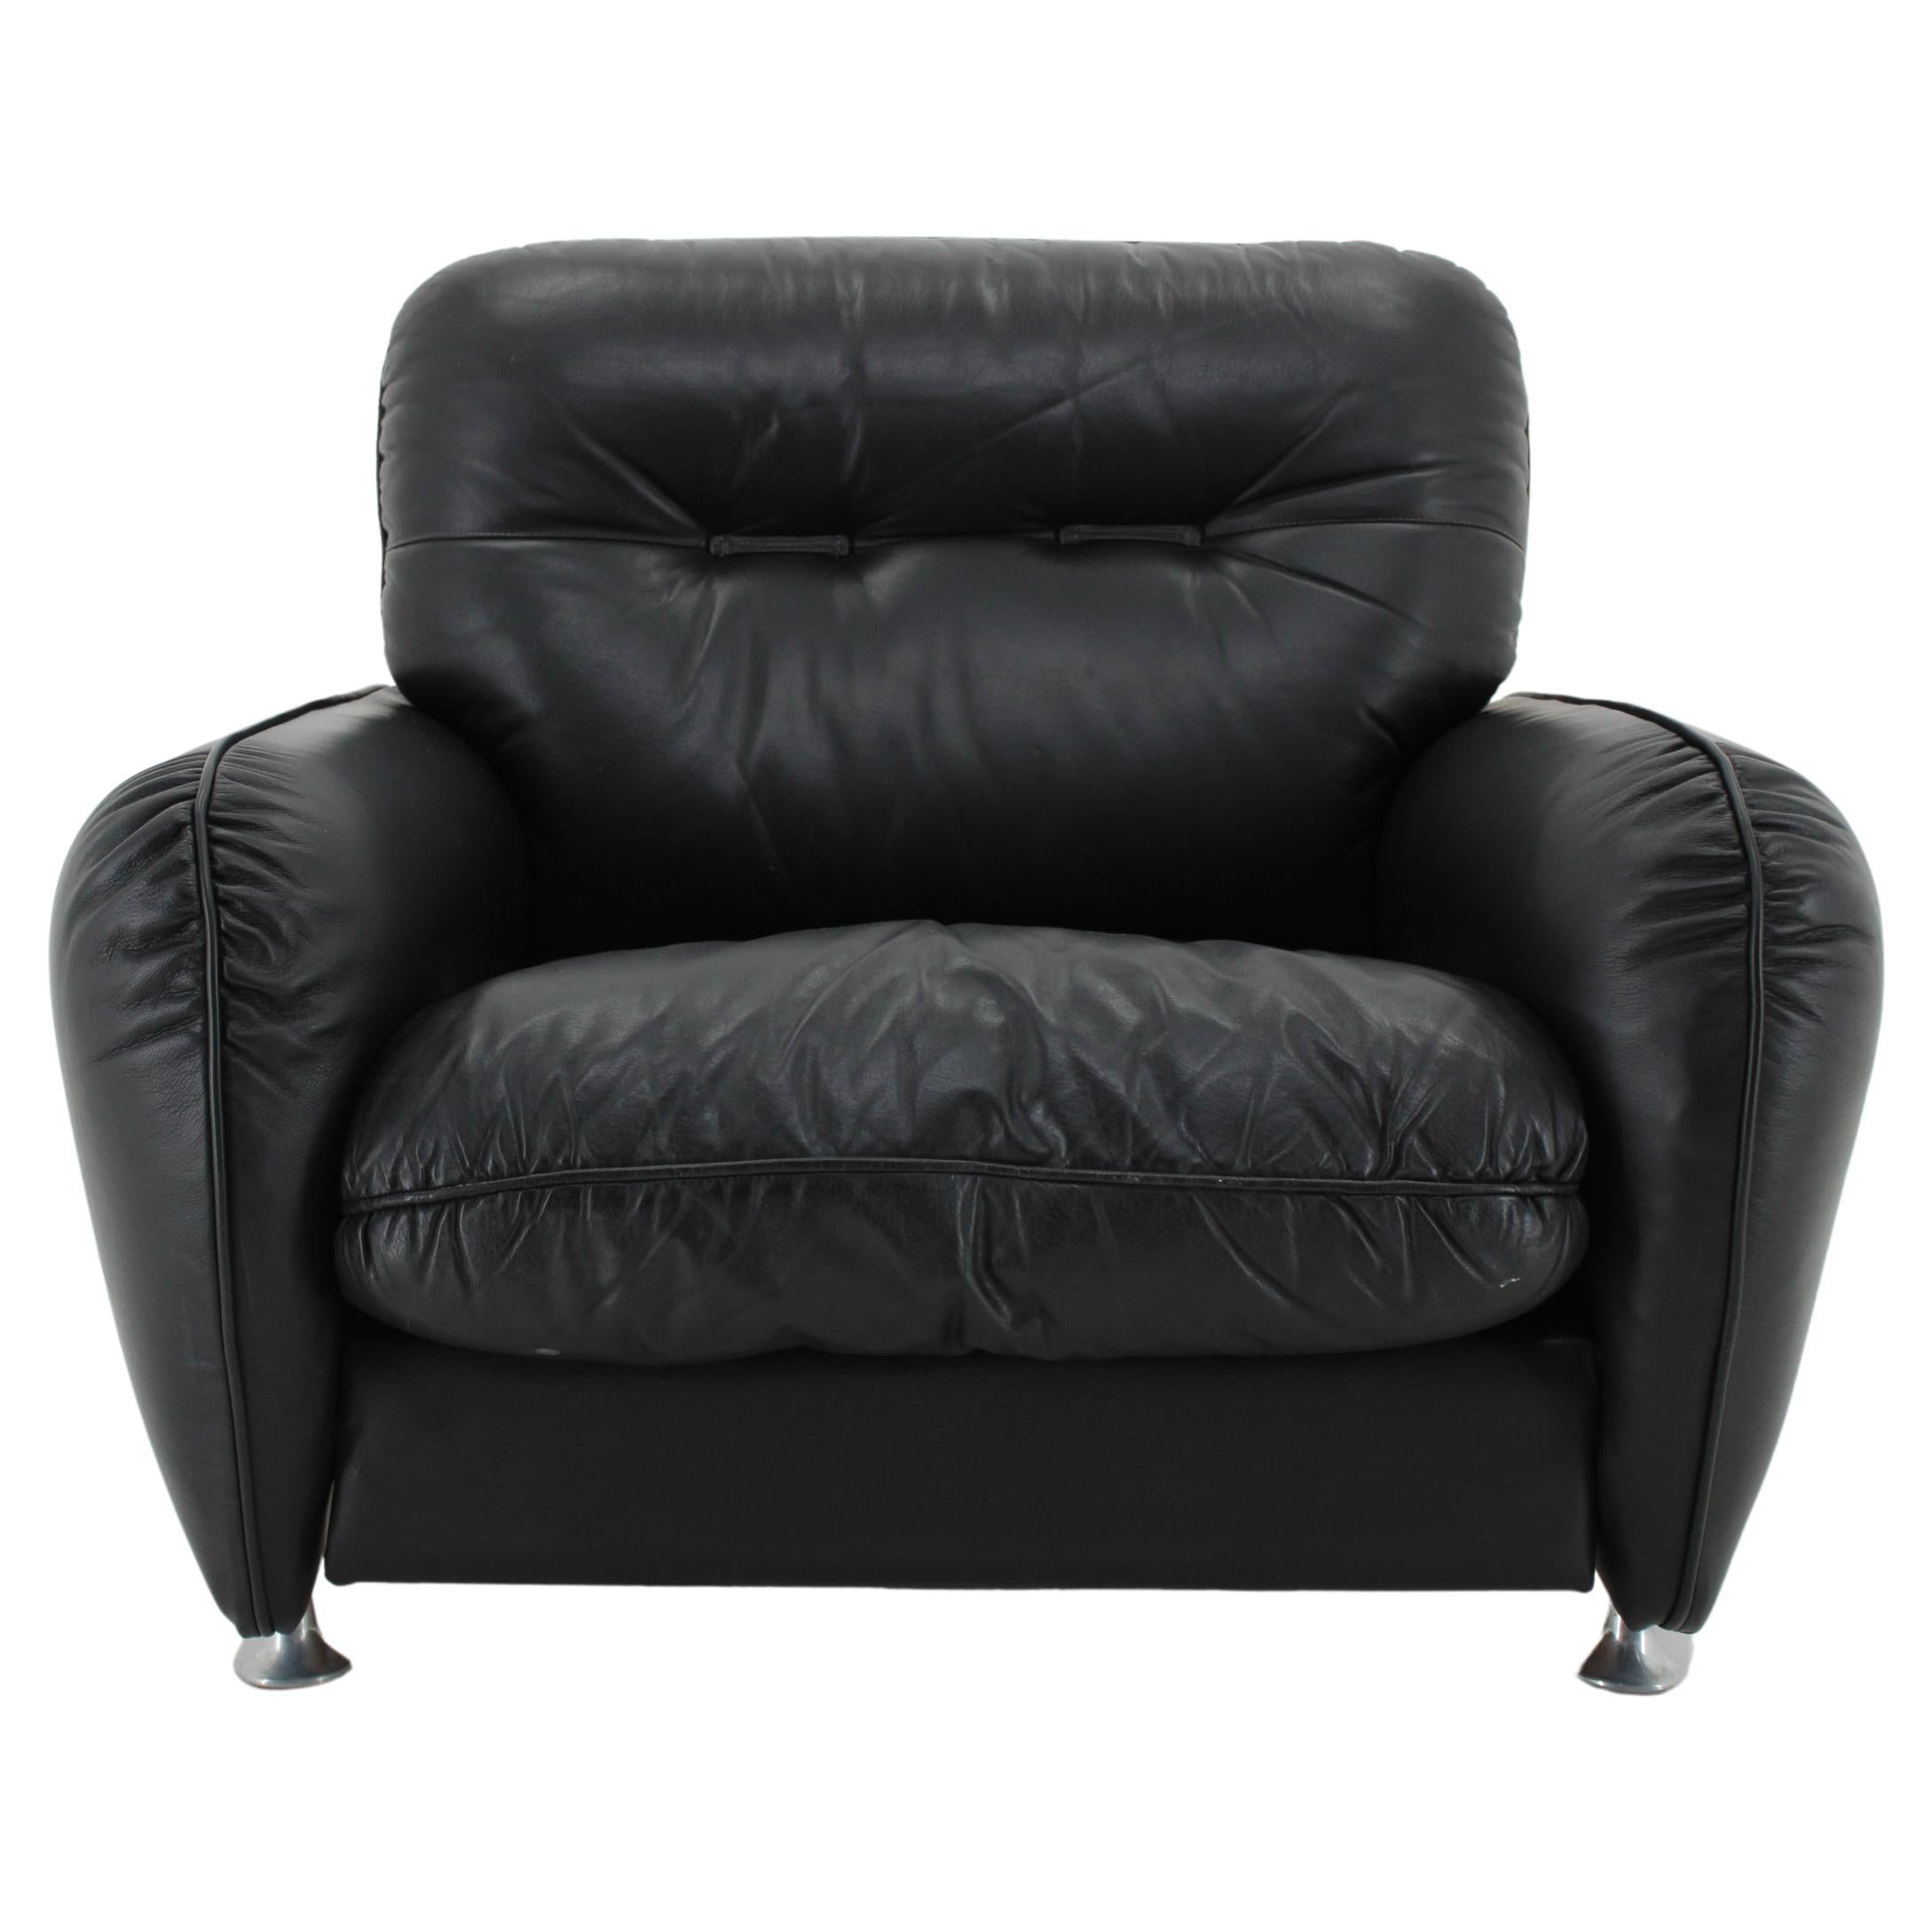  - Good condition with minor signs of use
 - The sides parts were newly reupholstered in very similar black leather
- Cleaned

